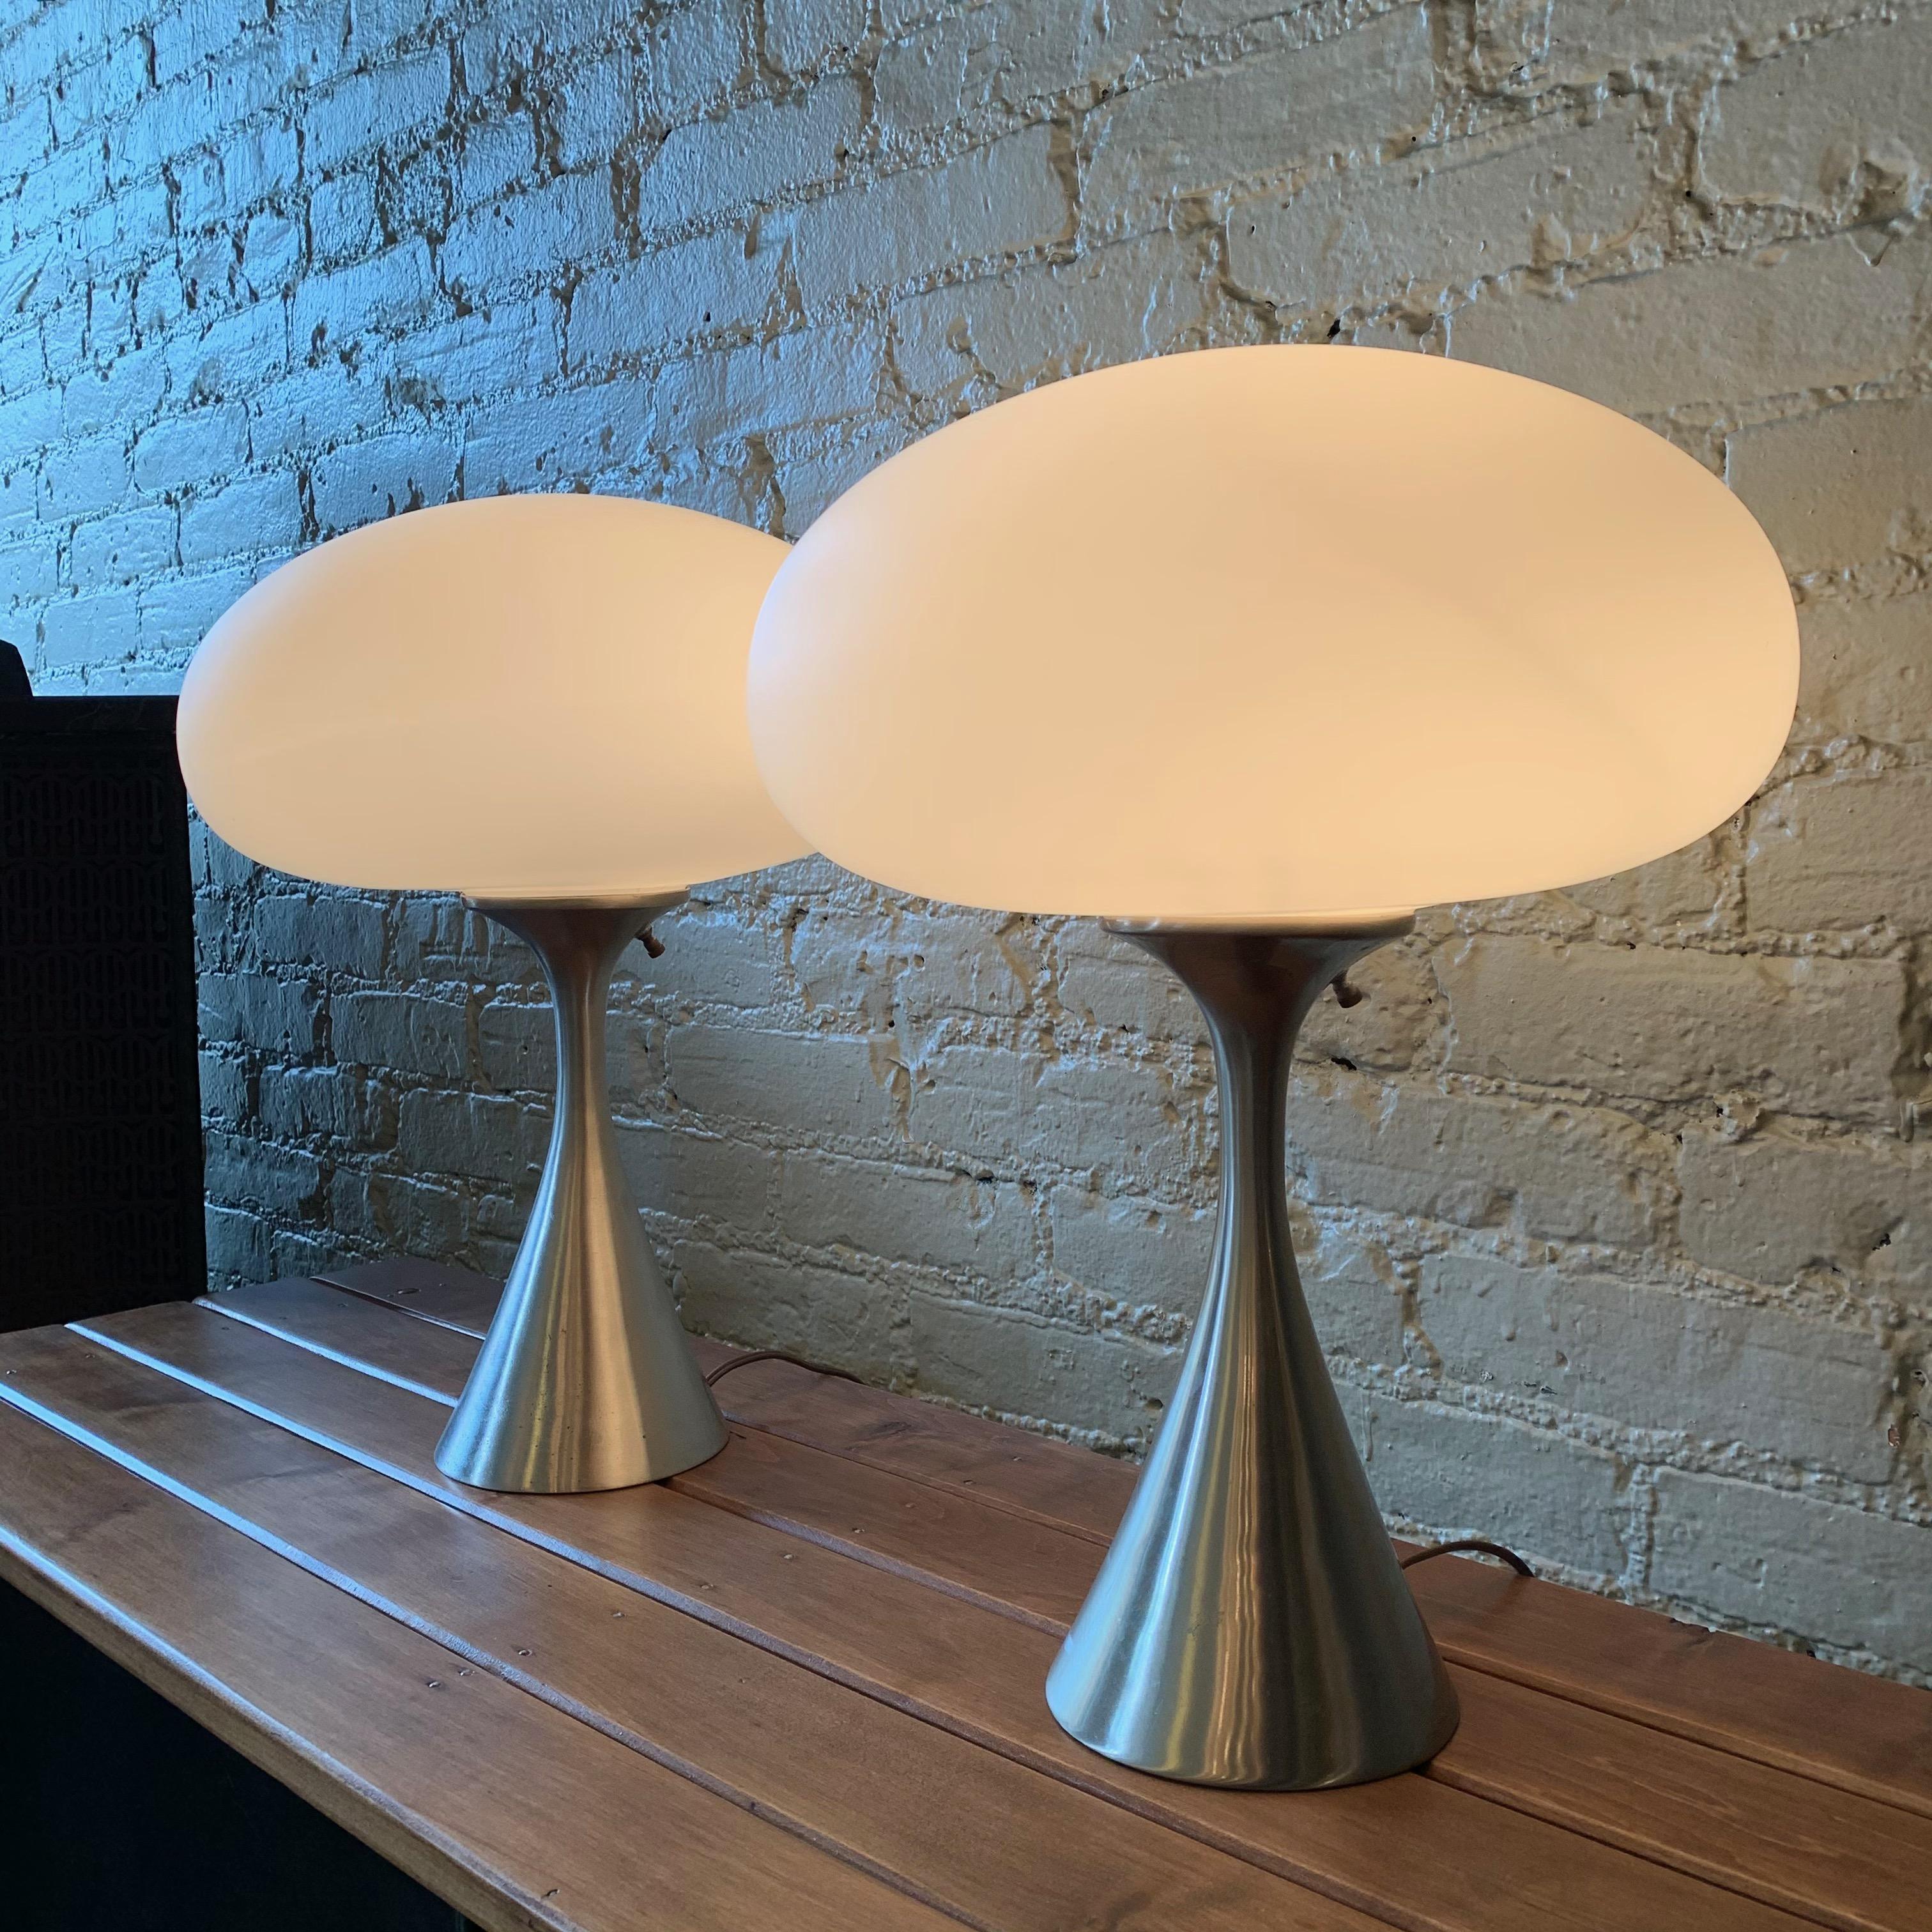 Frosted Pair of Brushed Aluminum Mushroom Table Lamps by Bill Curry for Laurel